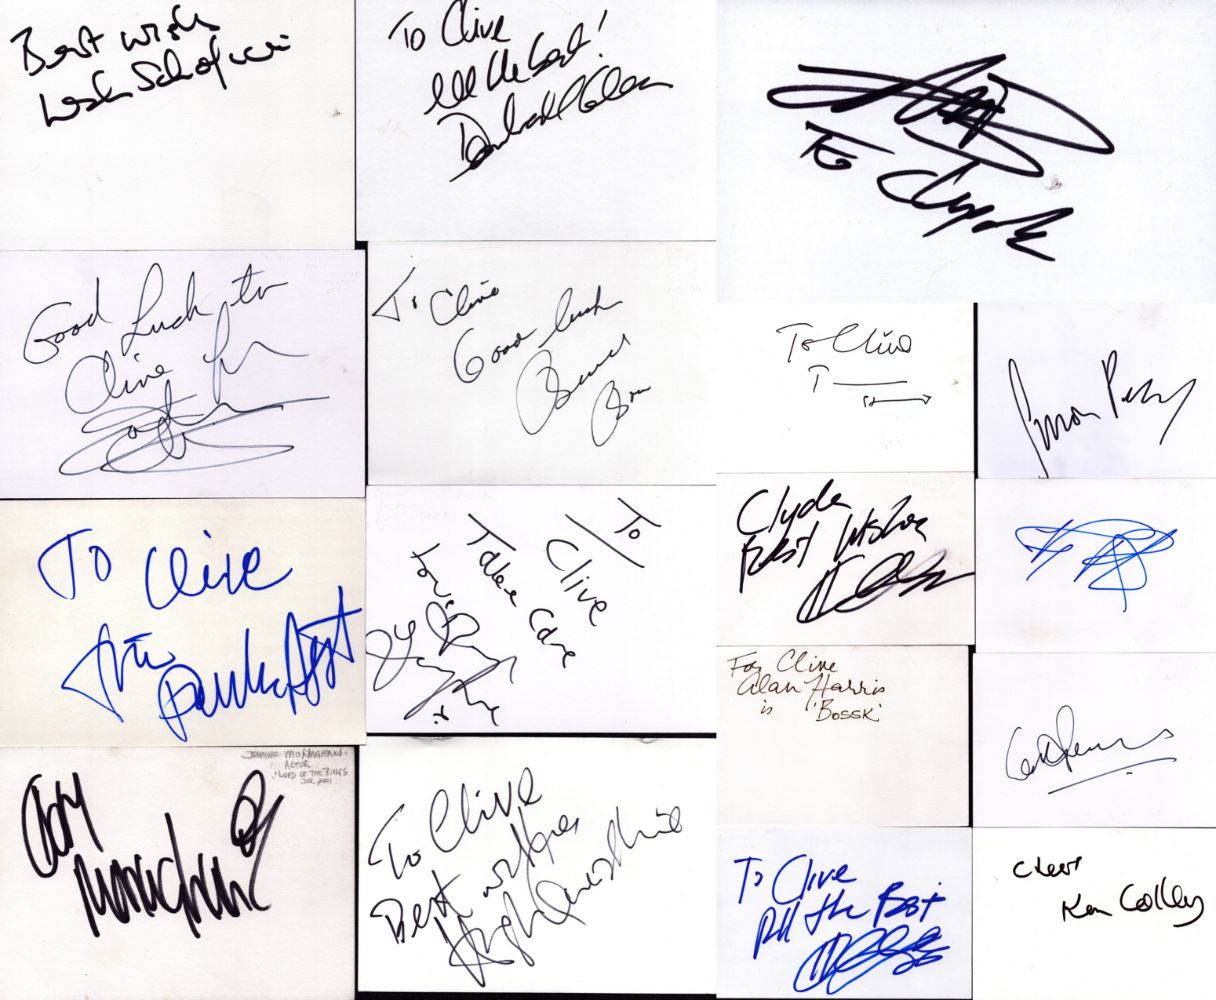 Autograph auction Football, Space, TV/Film, Military, Historic photos, covers and books.